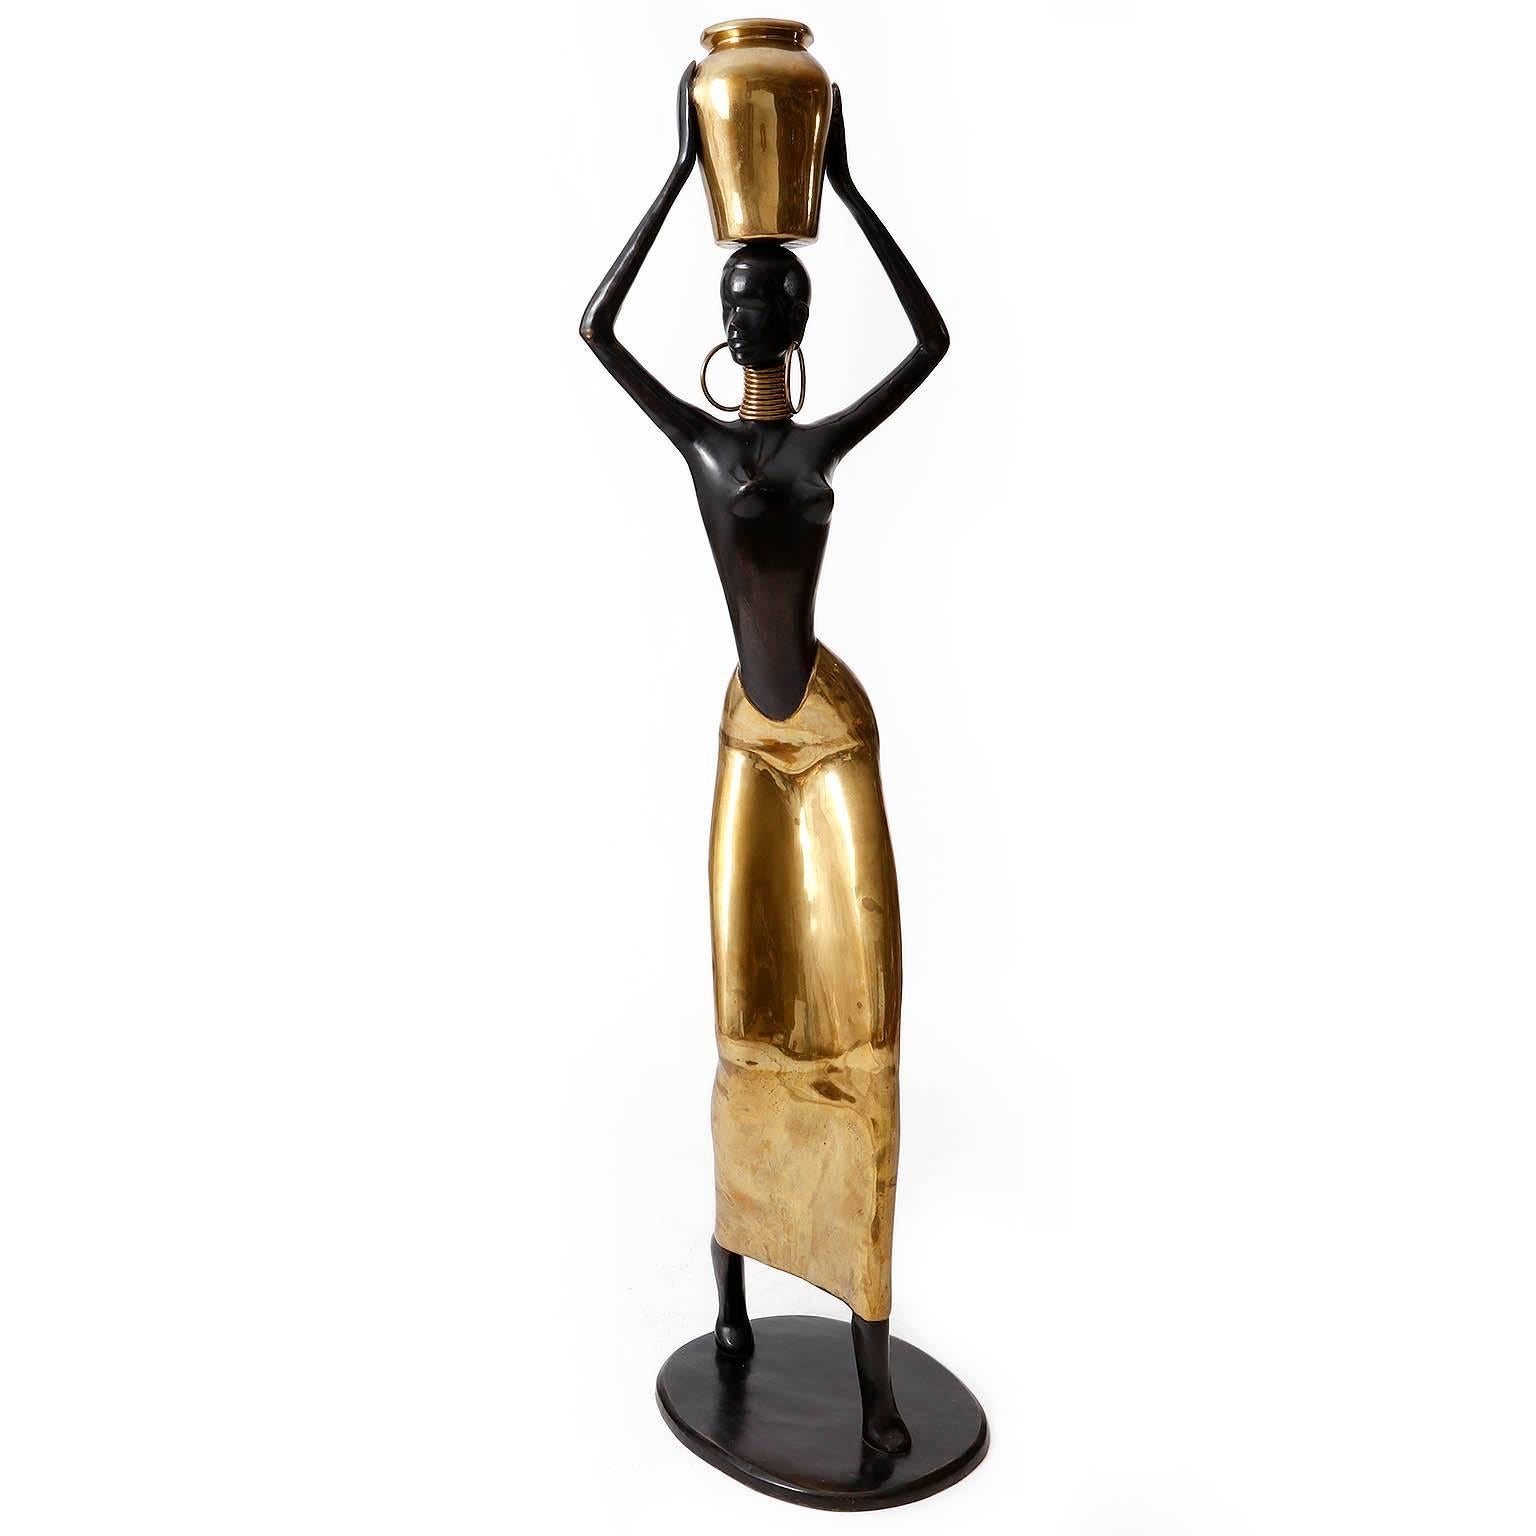 A large and beautiful African woman figurine made of polished and blackened brass manufactured in Mid-Century in the 1950s.
Little and lovely patina on brass. A gorgeous and eye-catching piece.